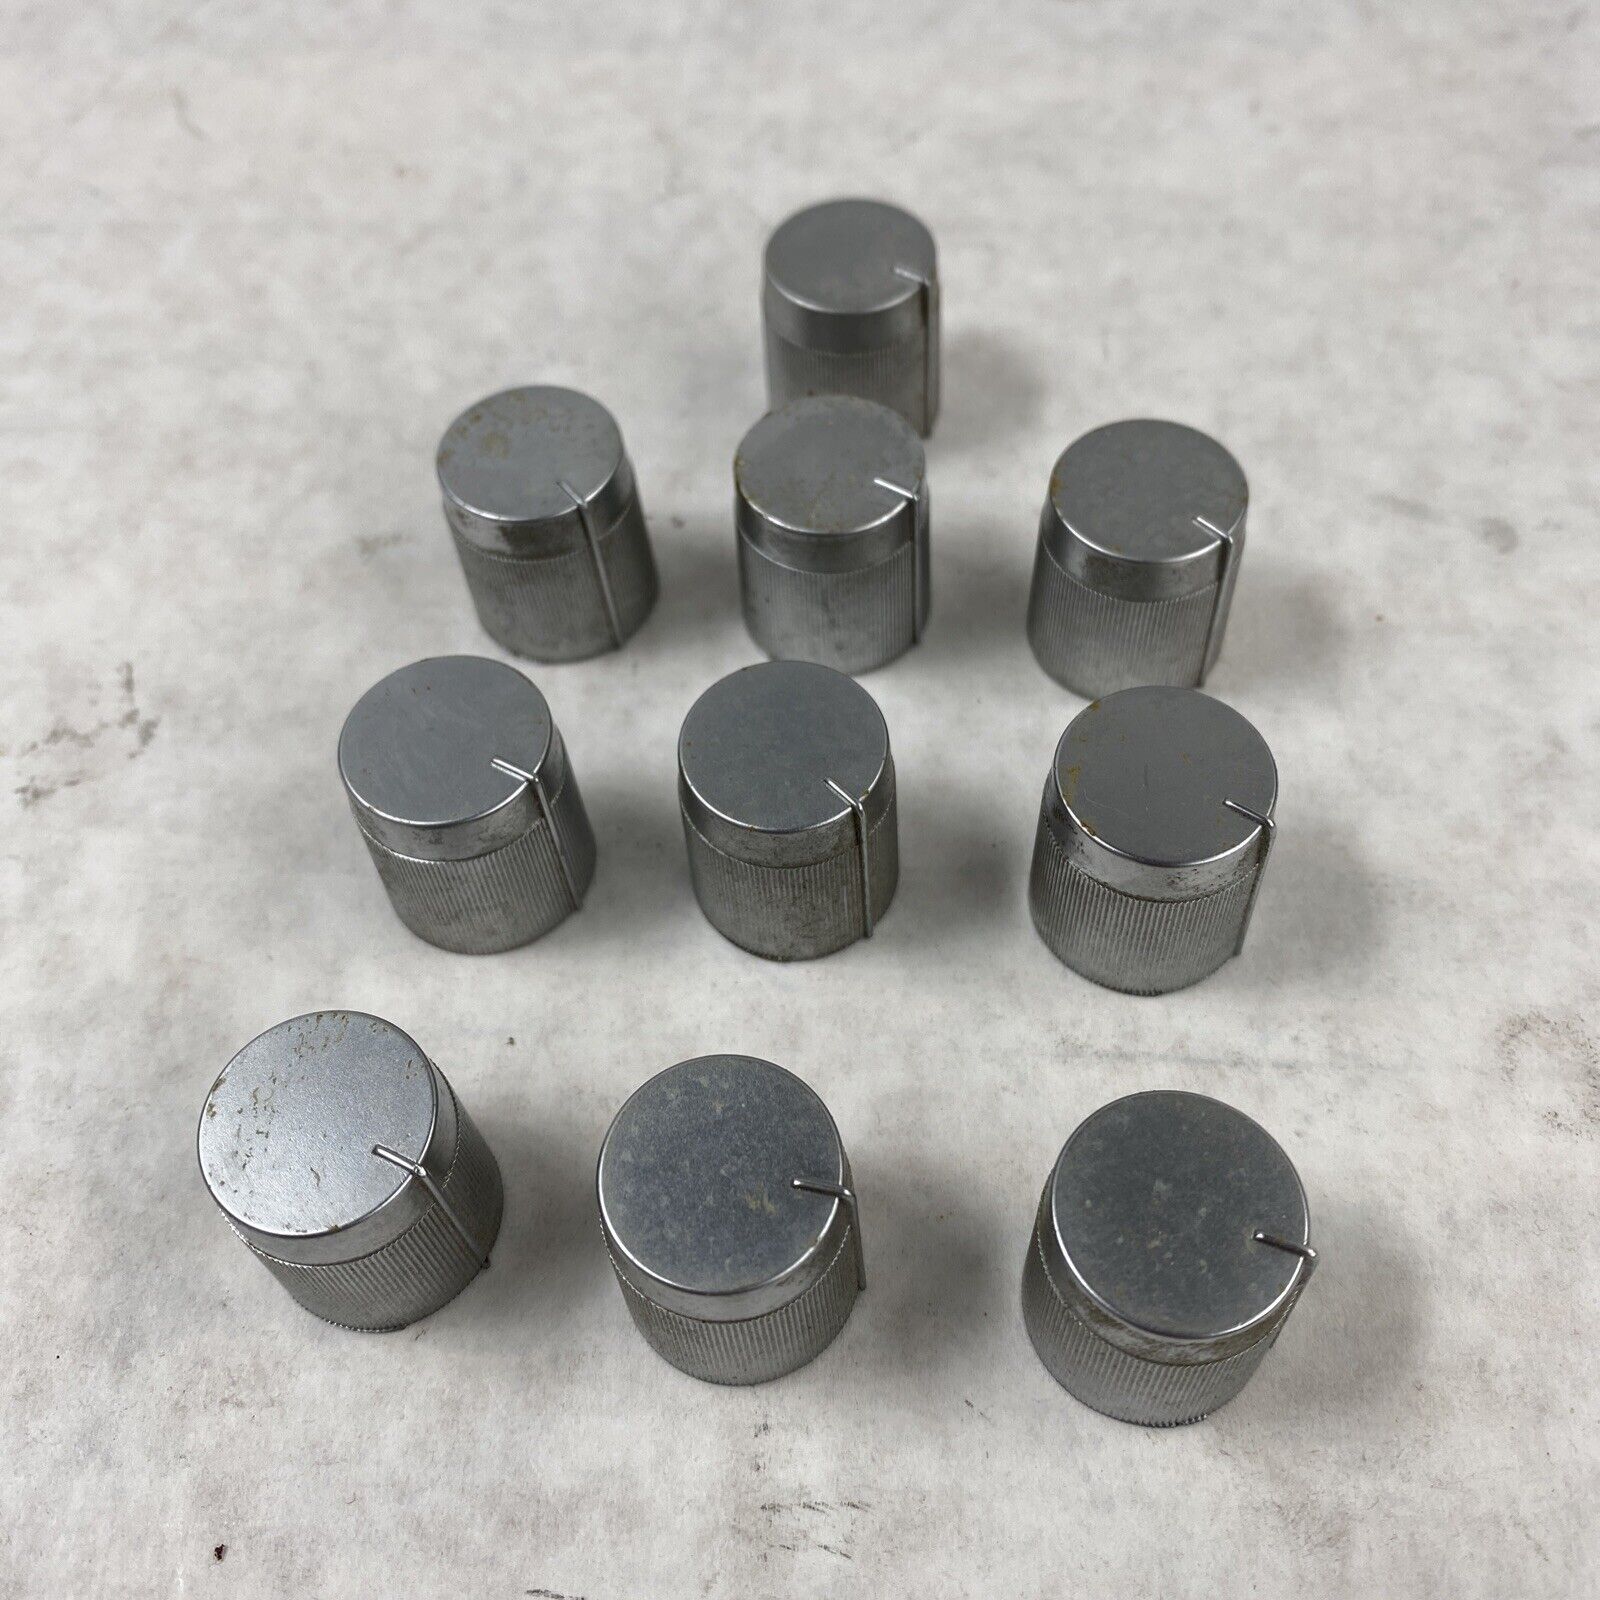 Lot ( 10 ) TOA M-900A Ampilifier REPLACEMENT KNOBS